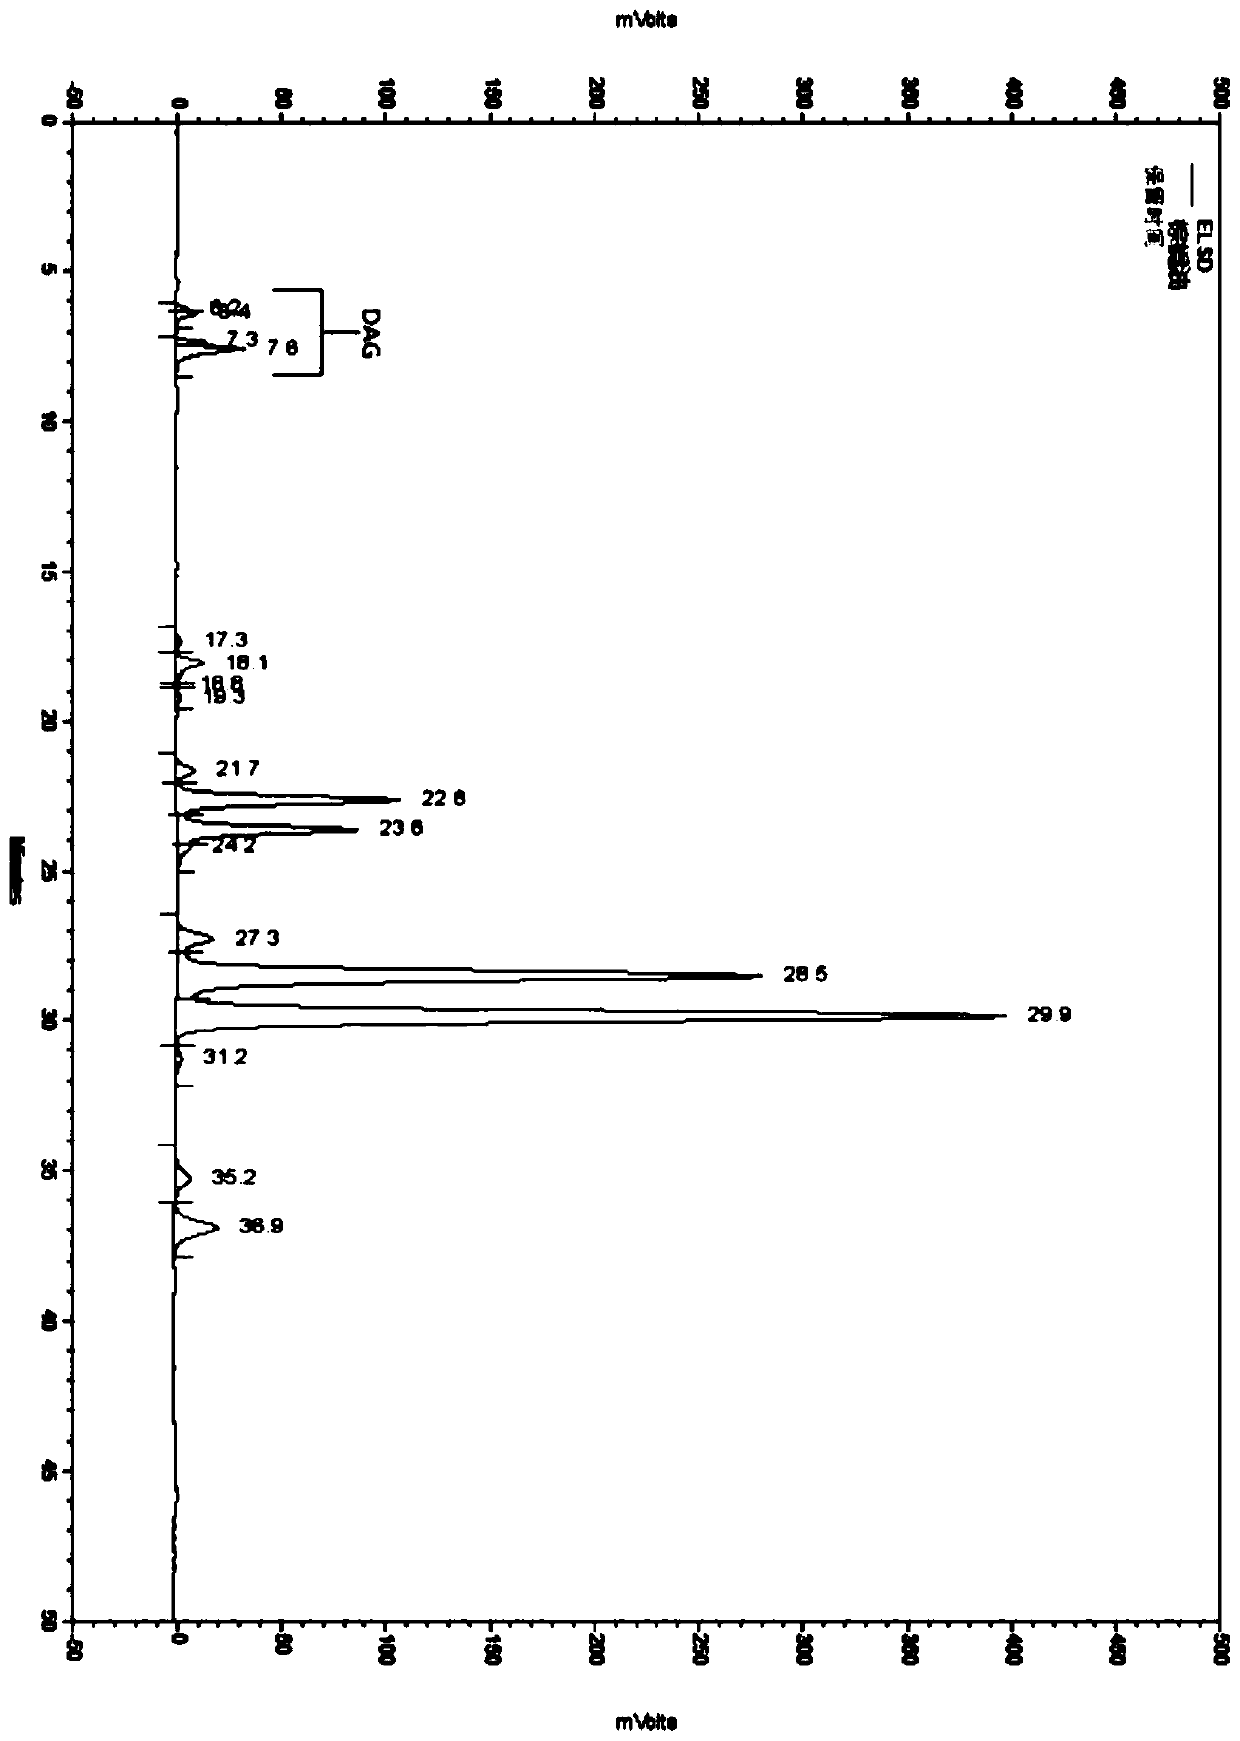 Method for preparing palm oil with low content of glycidyl ester and 3-MCPD ester